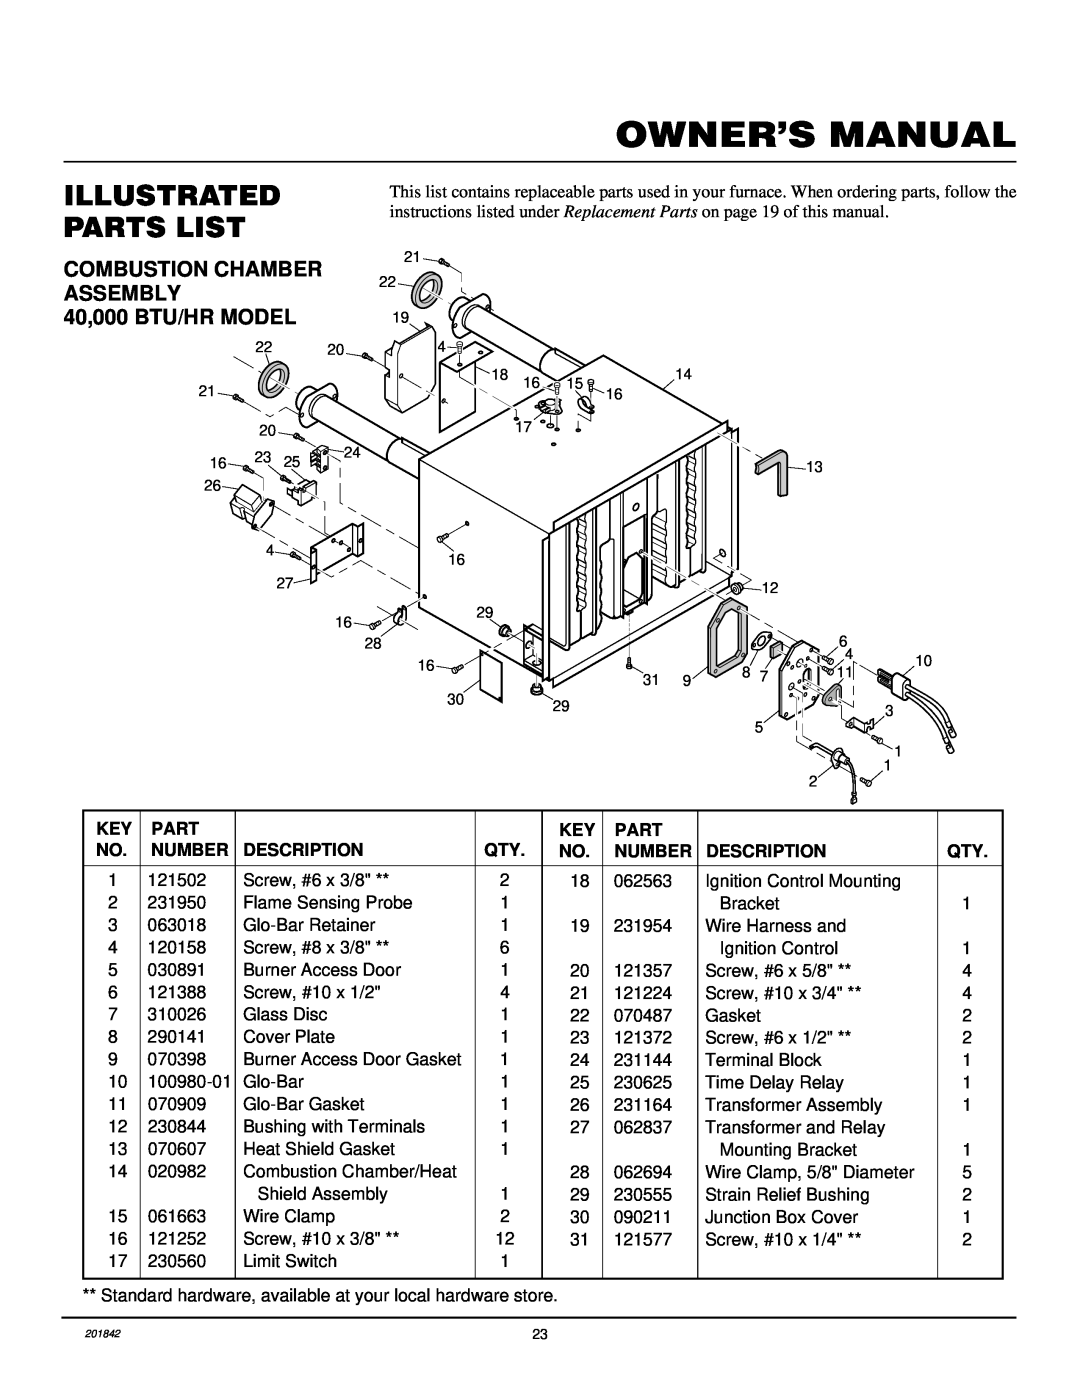 Williams 4003532, 2503532 Owner’S Manual, Illustrated Parts List, Combustion Chamber, Assembly, 40,000 BTU/HR MODEL 